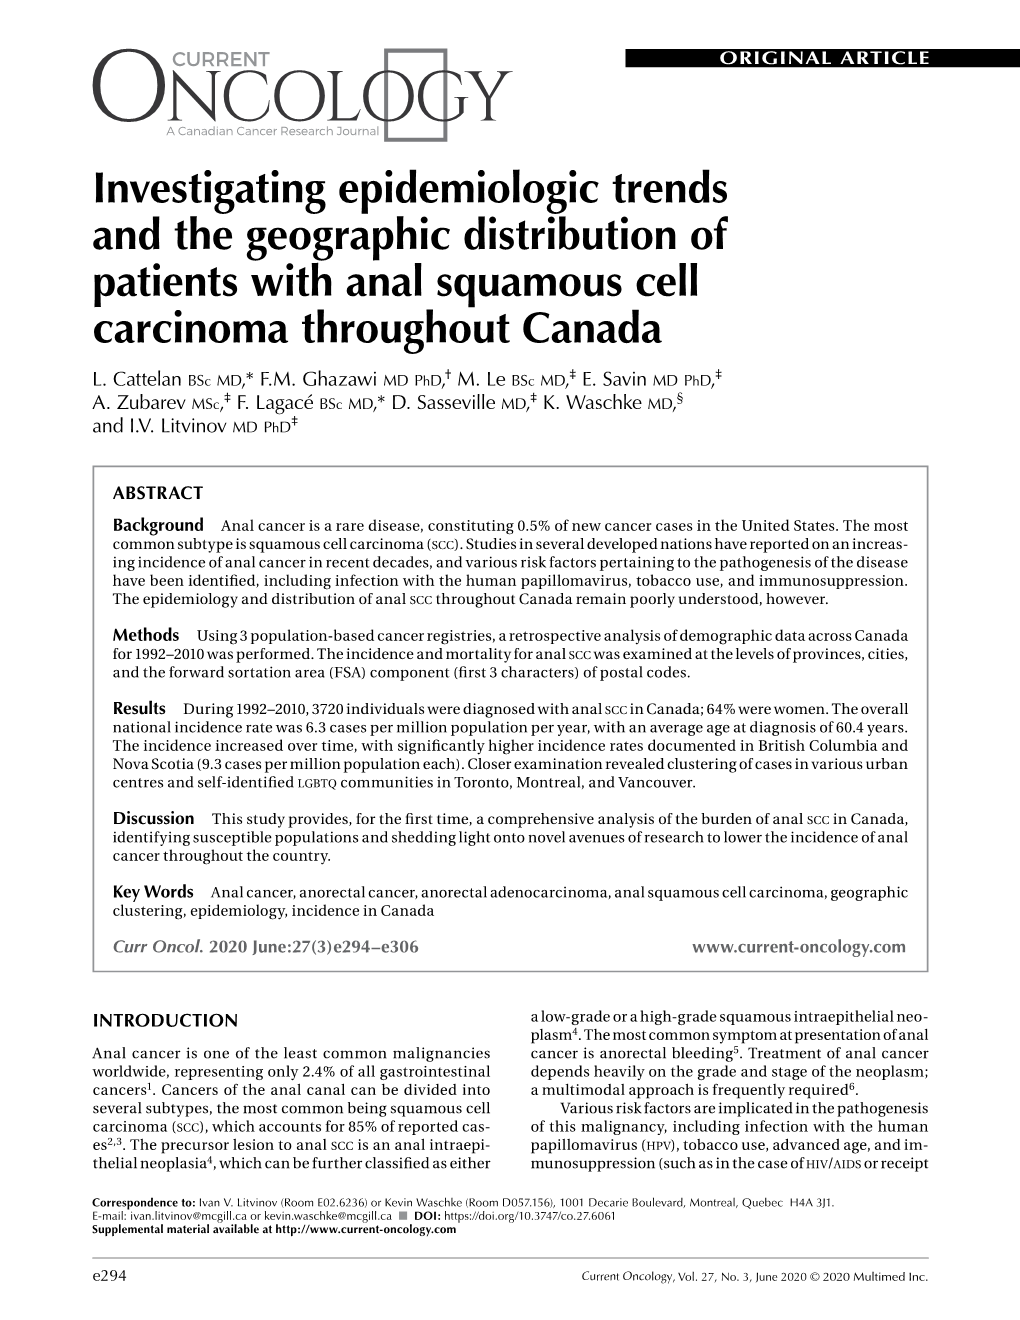 Investigating Epidemiologic Trends and the Geographic Distribution of Patients with Anal Squamous Cell Carcinoma Throughout Canada